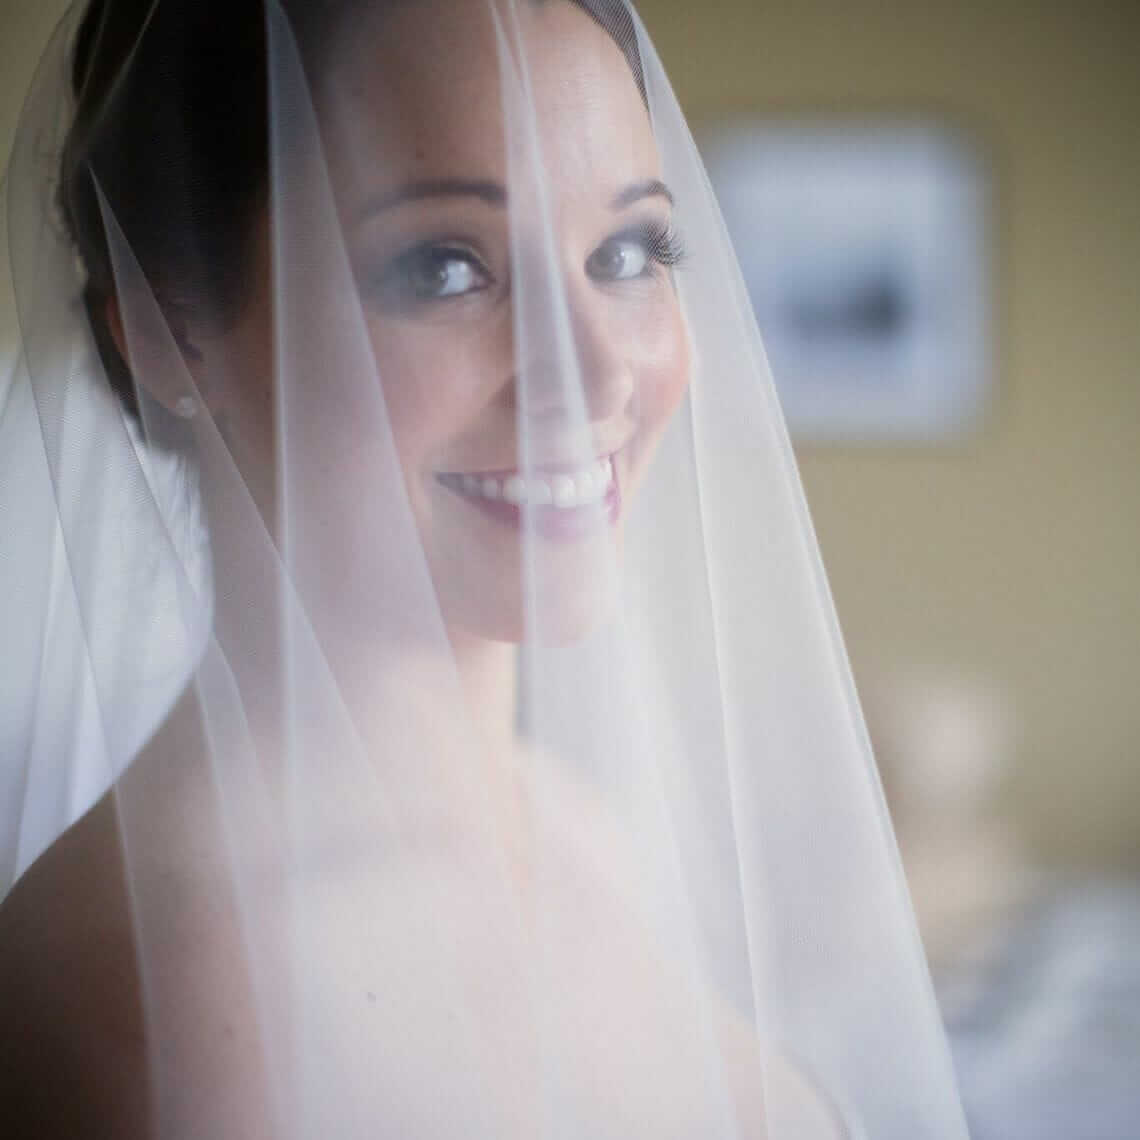 A bride wearing a veil in front of a bed.